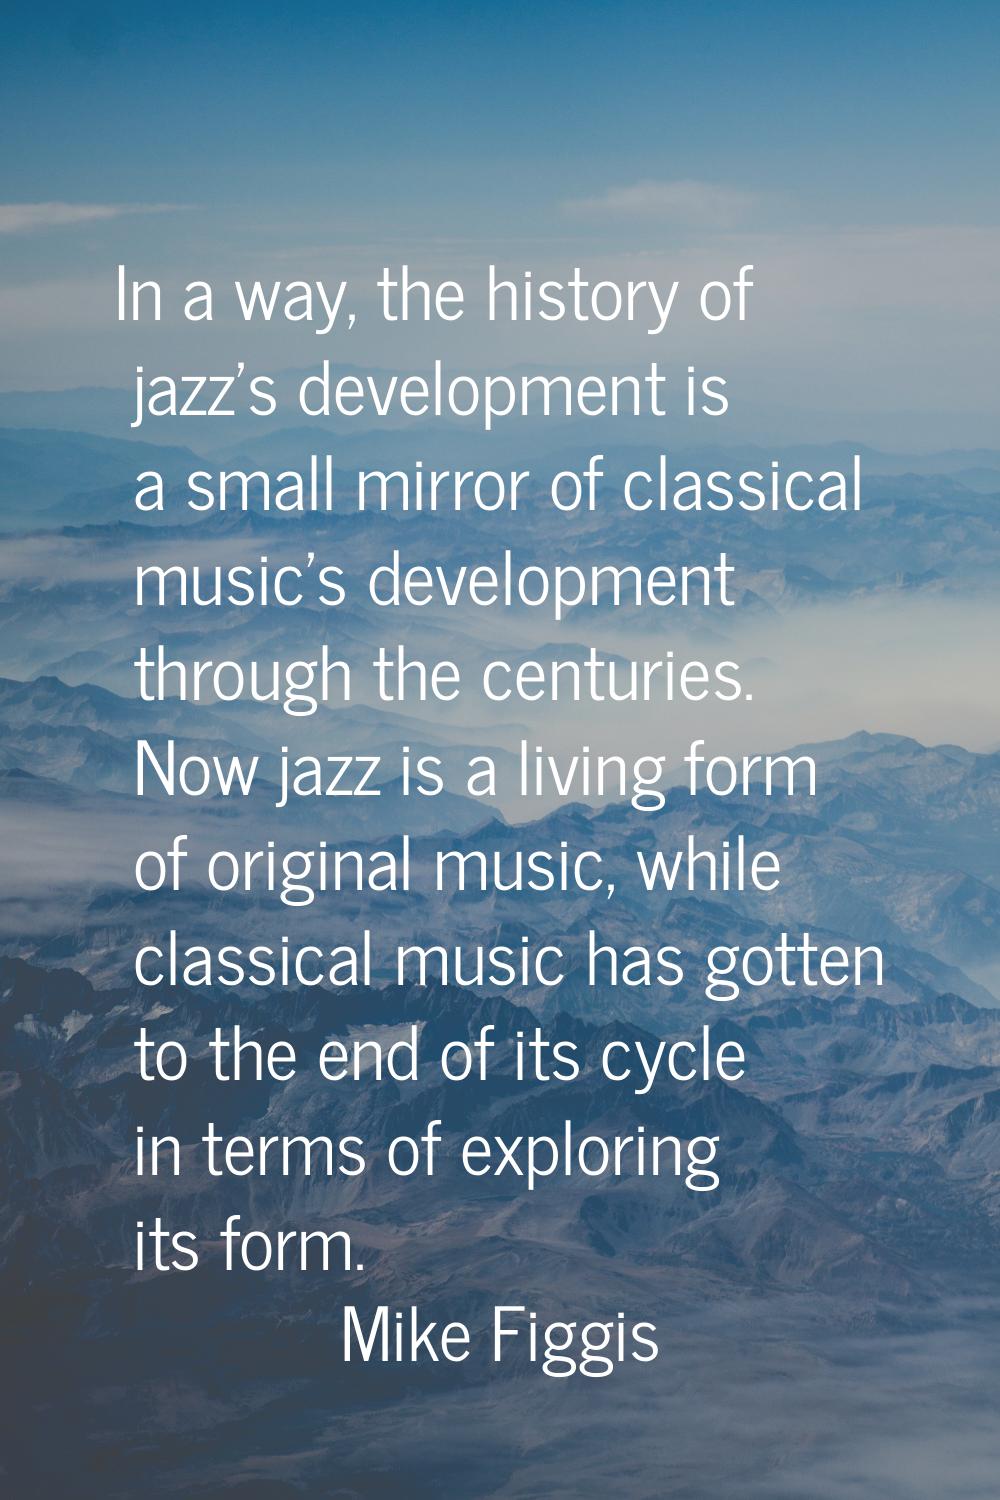 In a way, the history of jazz's development is a small mirror of classical music's development thro